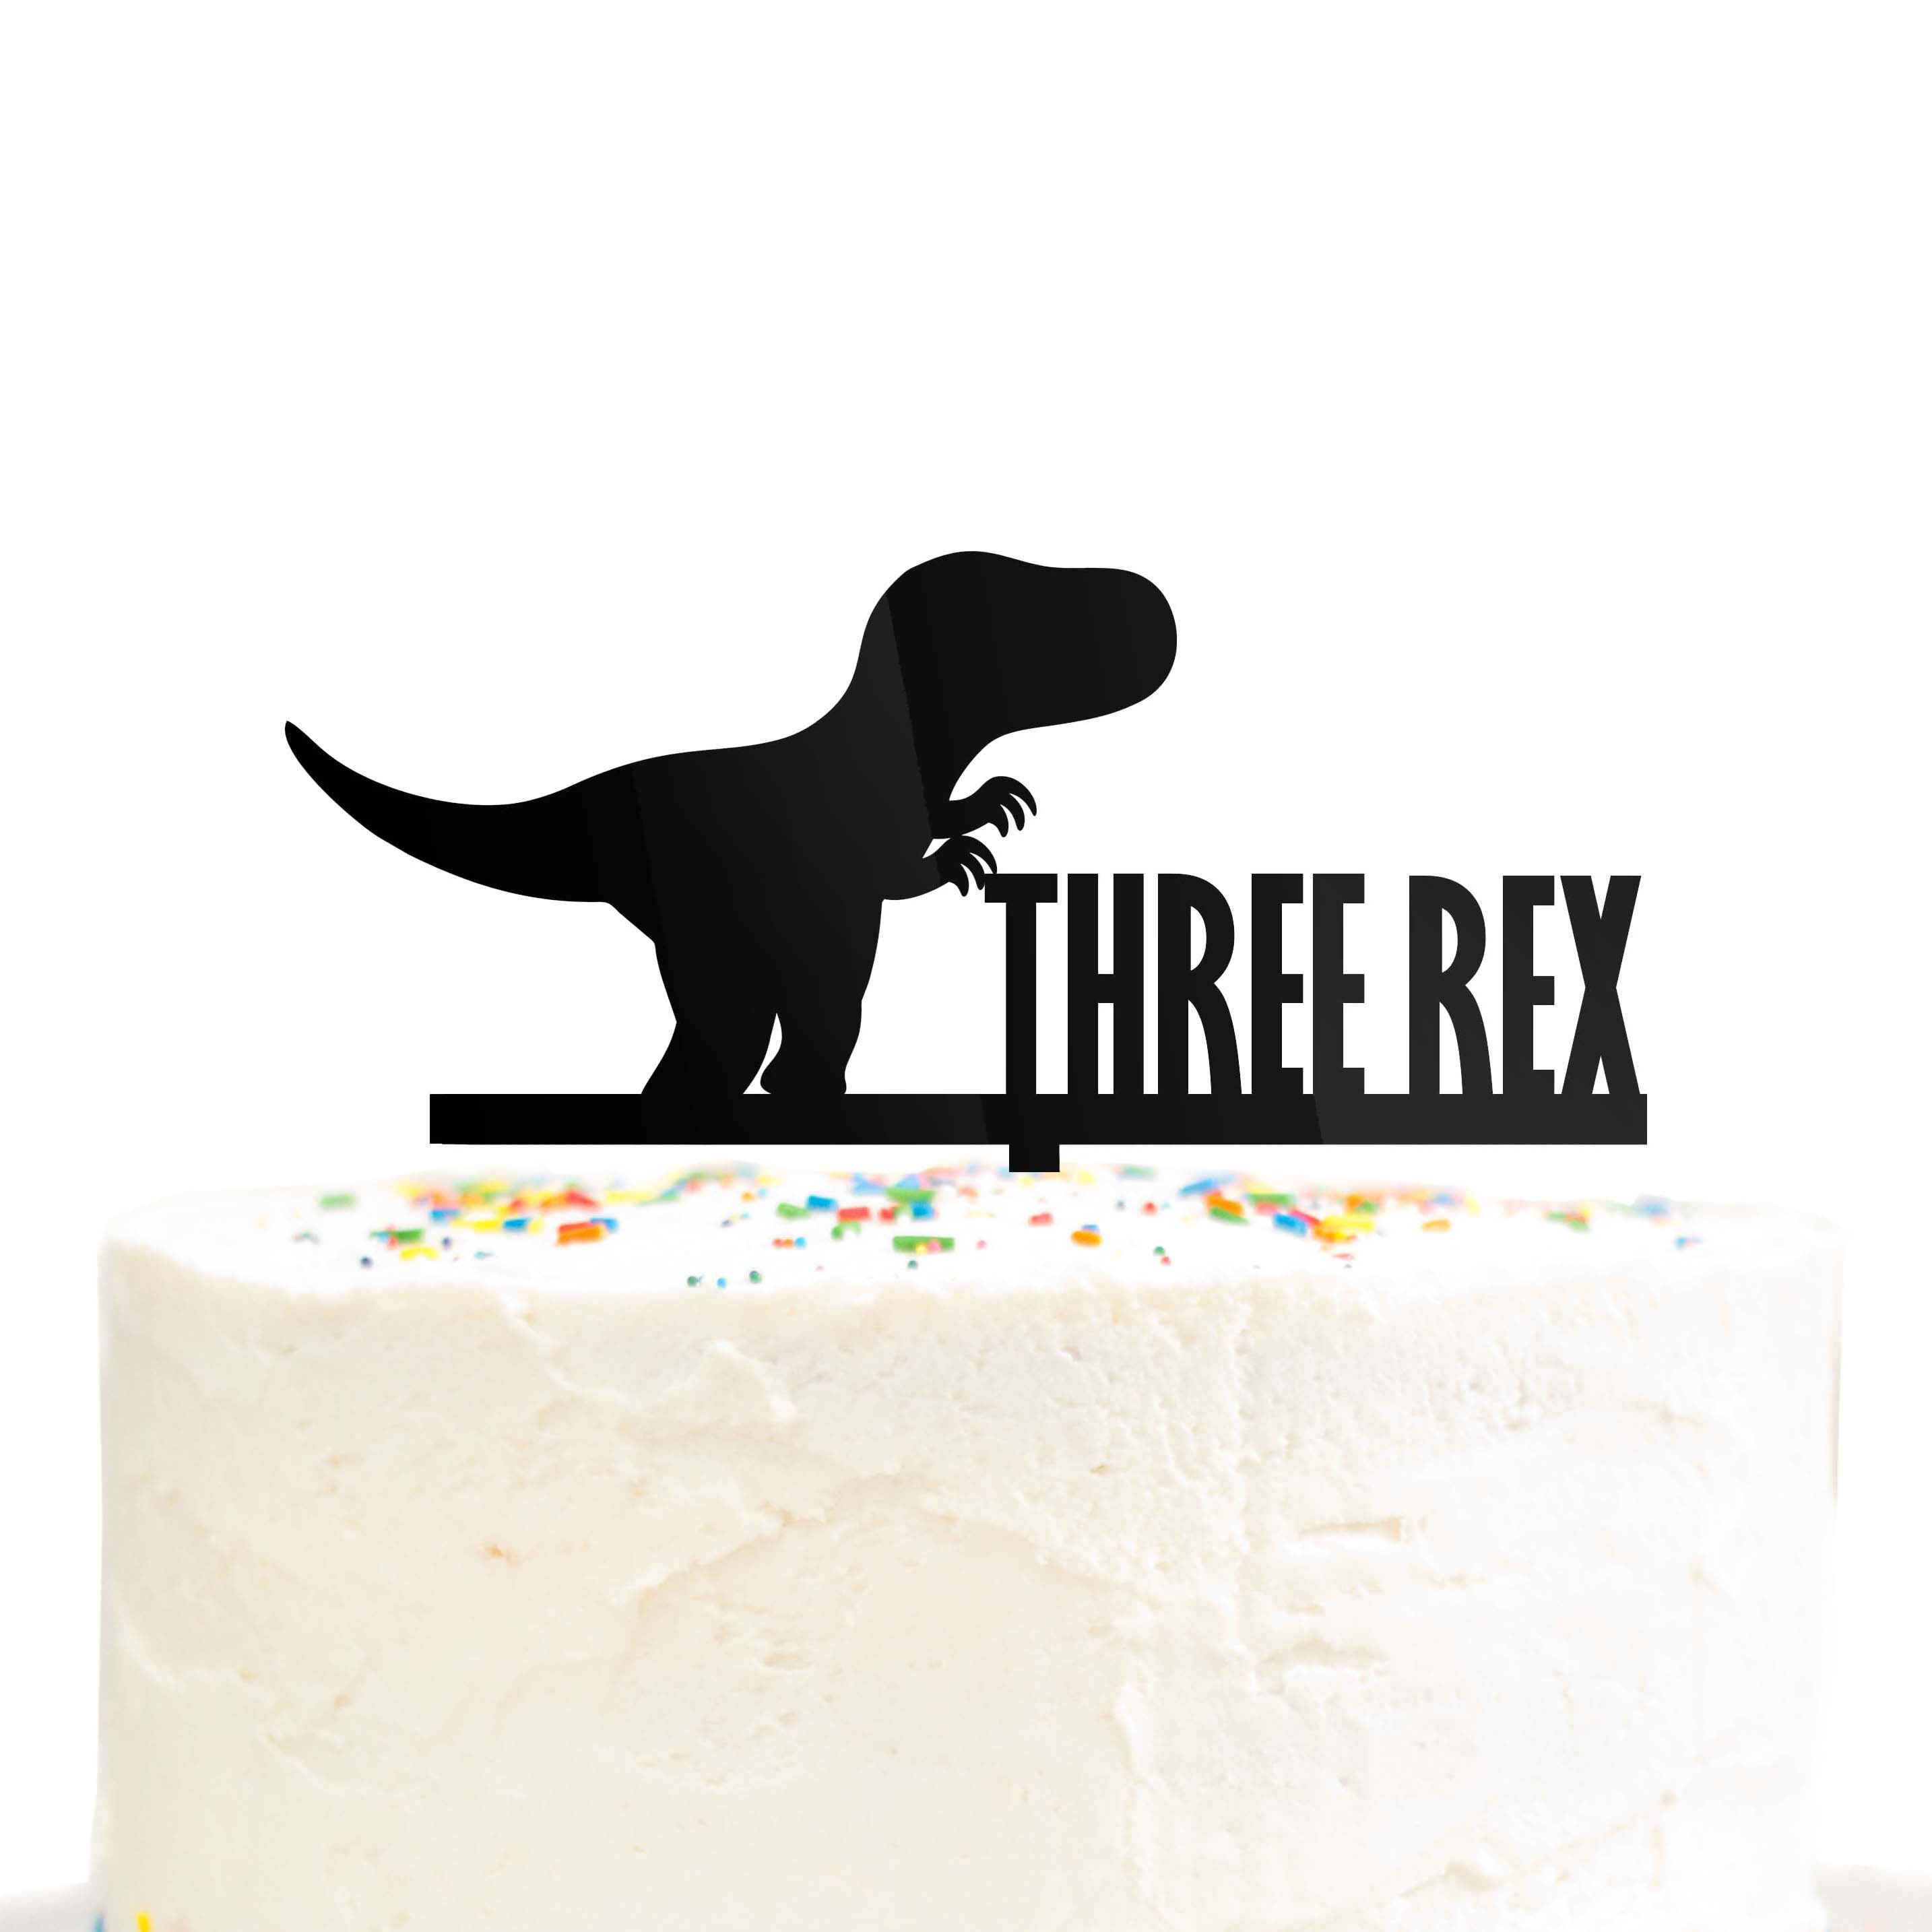 Dinosaur 19cm Edible Icing Image Birthday Party Cake Topper Decoration #1